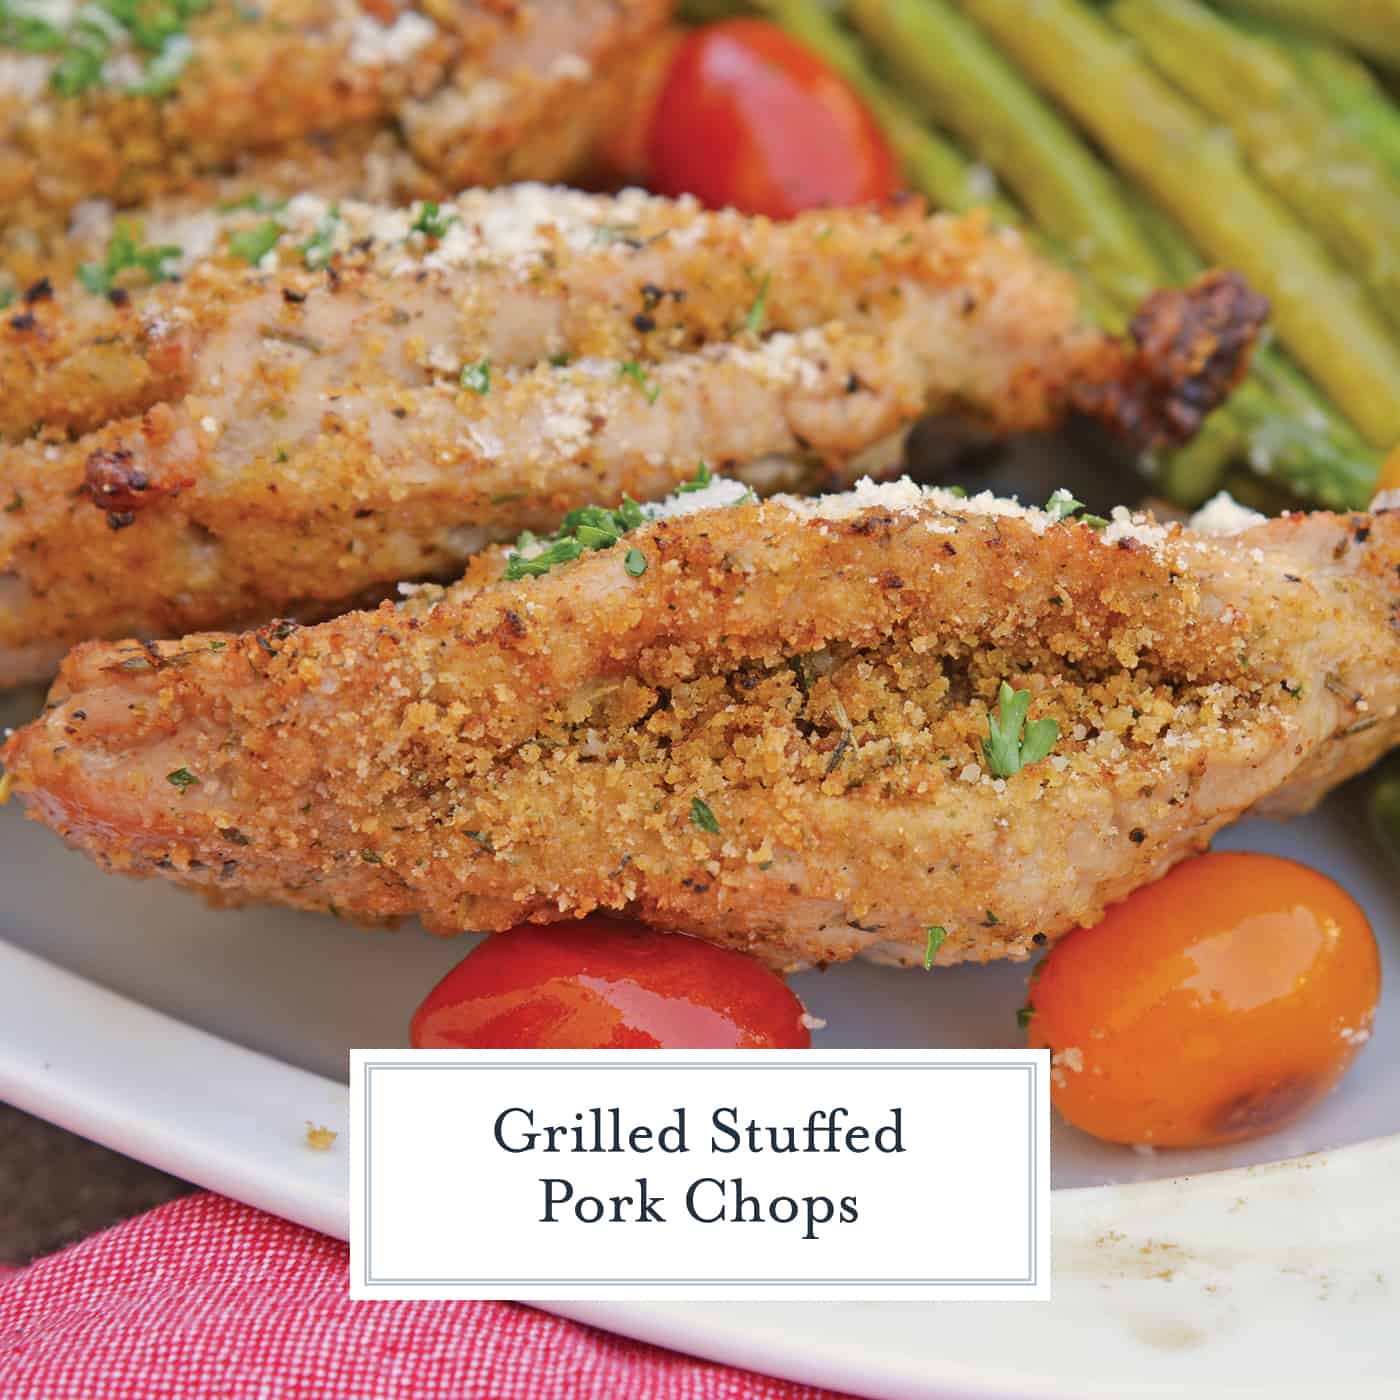 Grilled Stuffed Pork Chops are an easy grilled pork recipe. Herb marinated pork is stuffed with bread crumbs, herbs and Parmesan cheese and grilled to flavorful perfection in just 15 minutes! #grilledporkchops #stuffedporkchops www.savoryexperiments.com